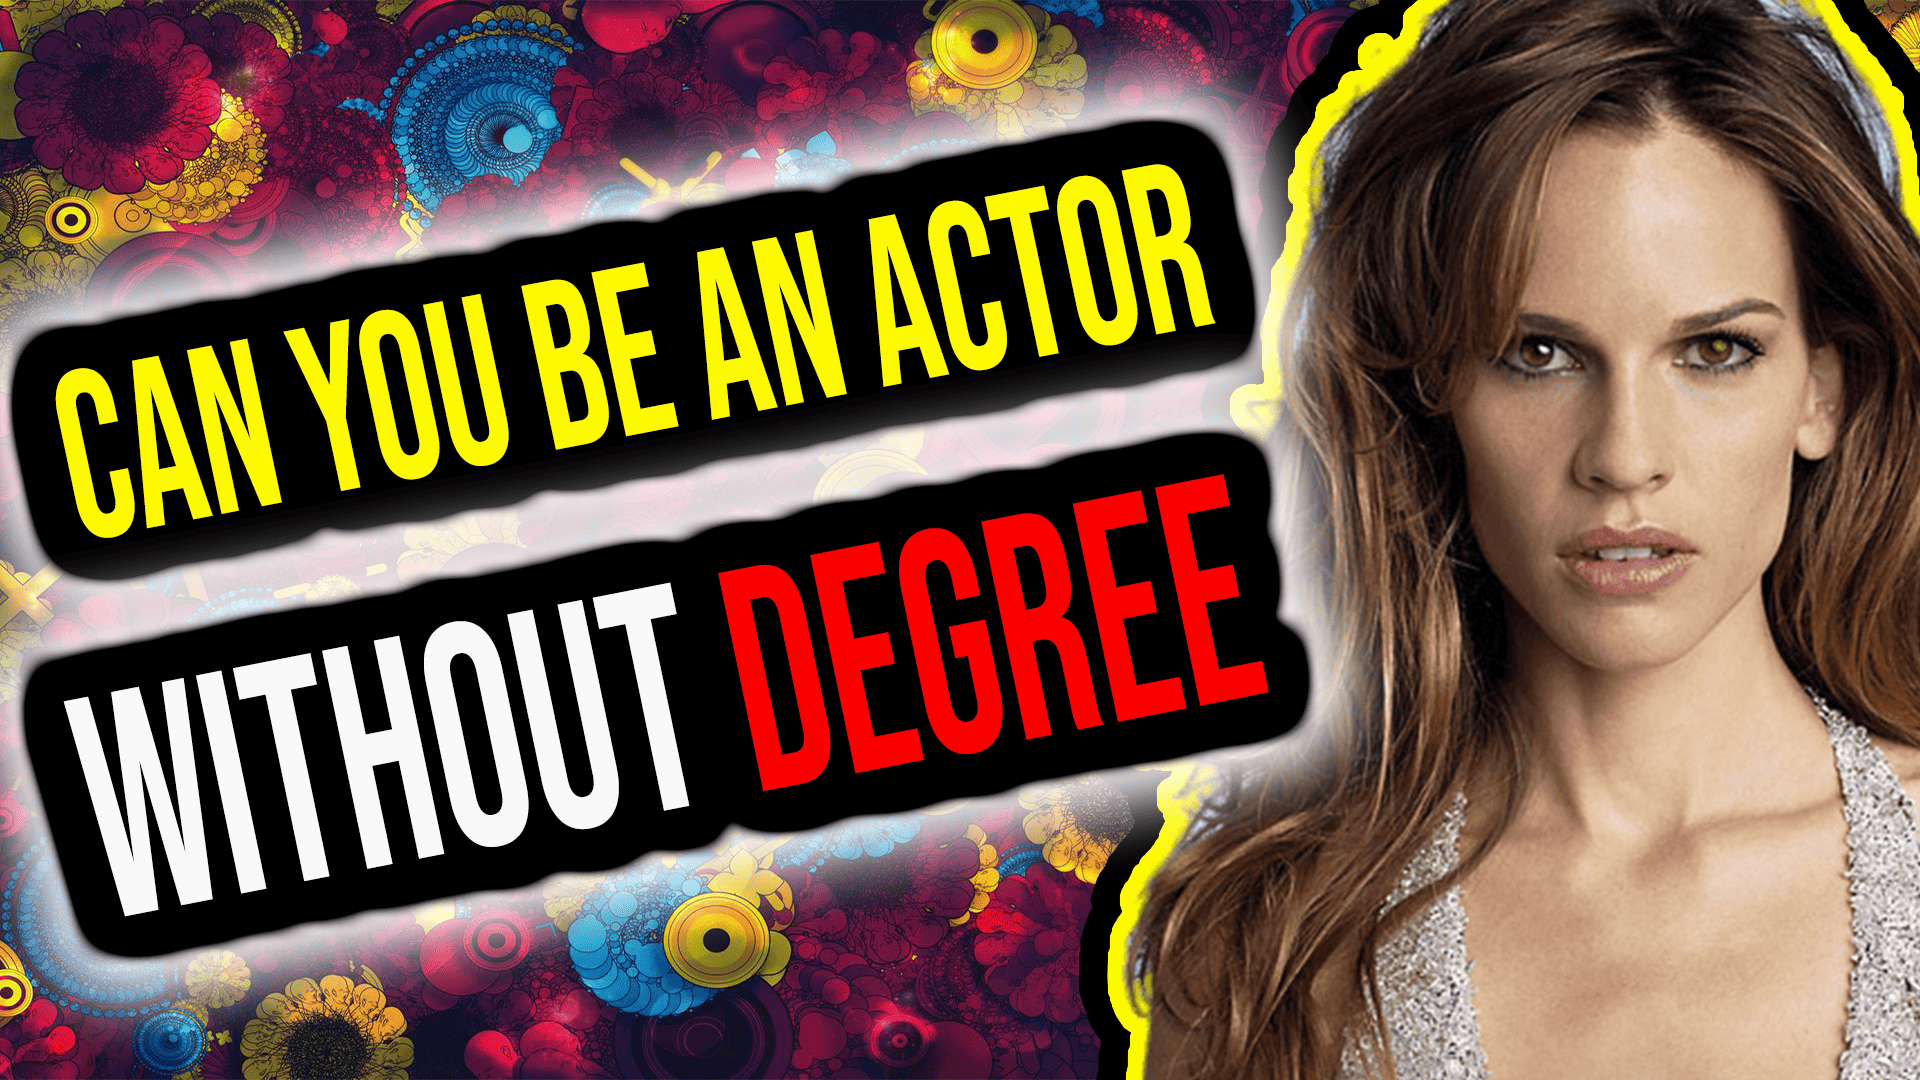 Can You Be an Actor Without Degree